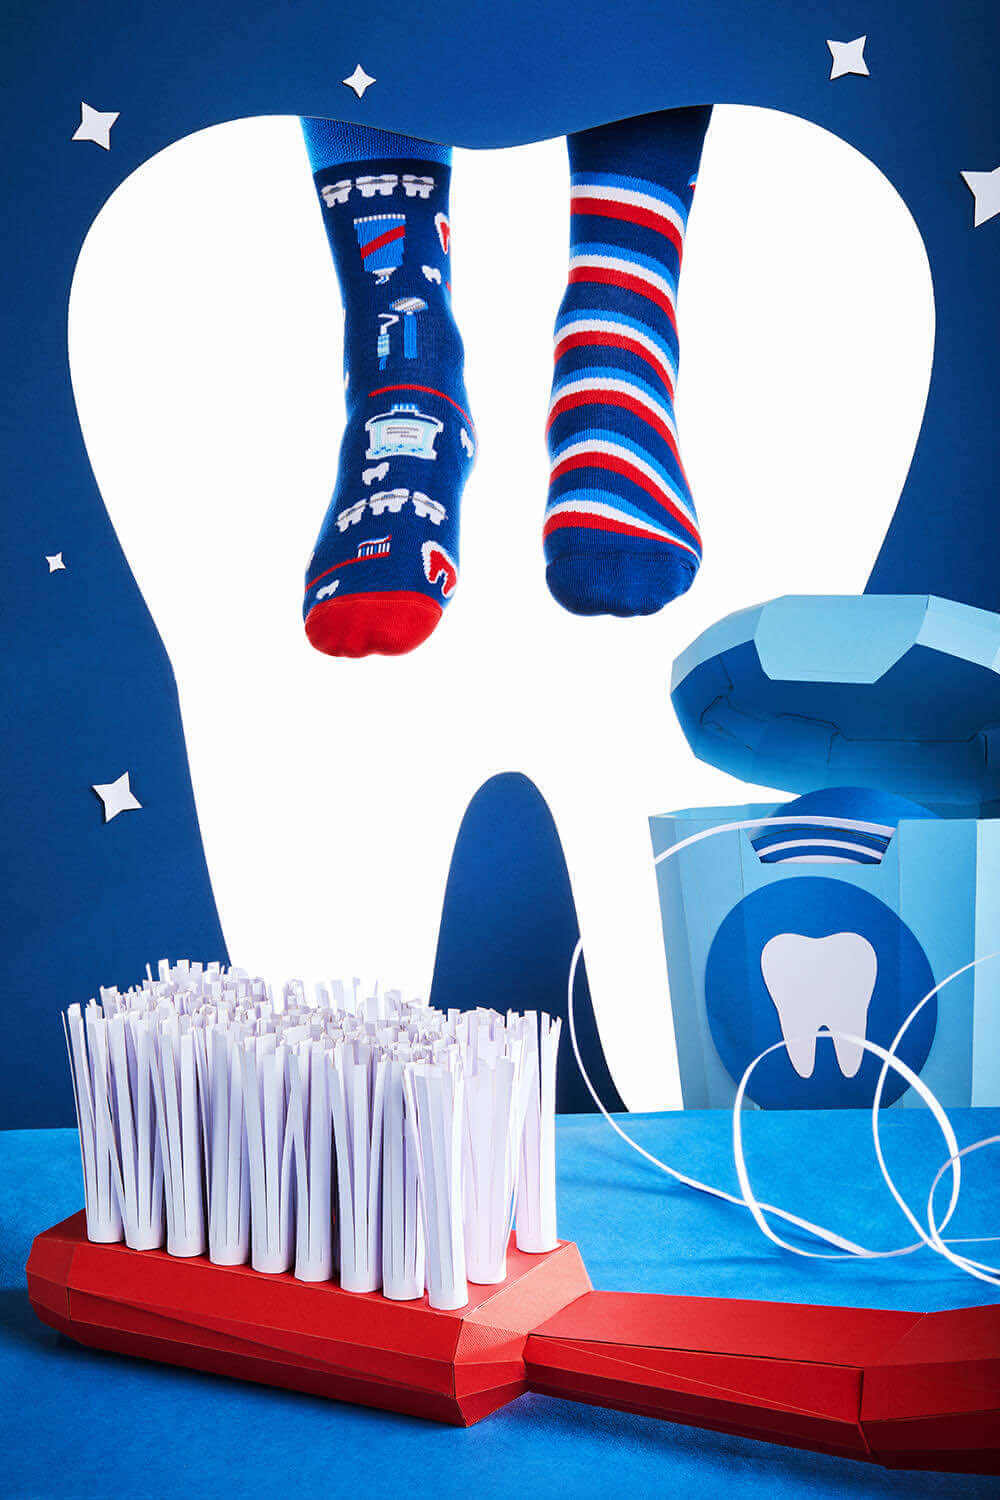 DR TOOTH - Chaussettes motif dents